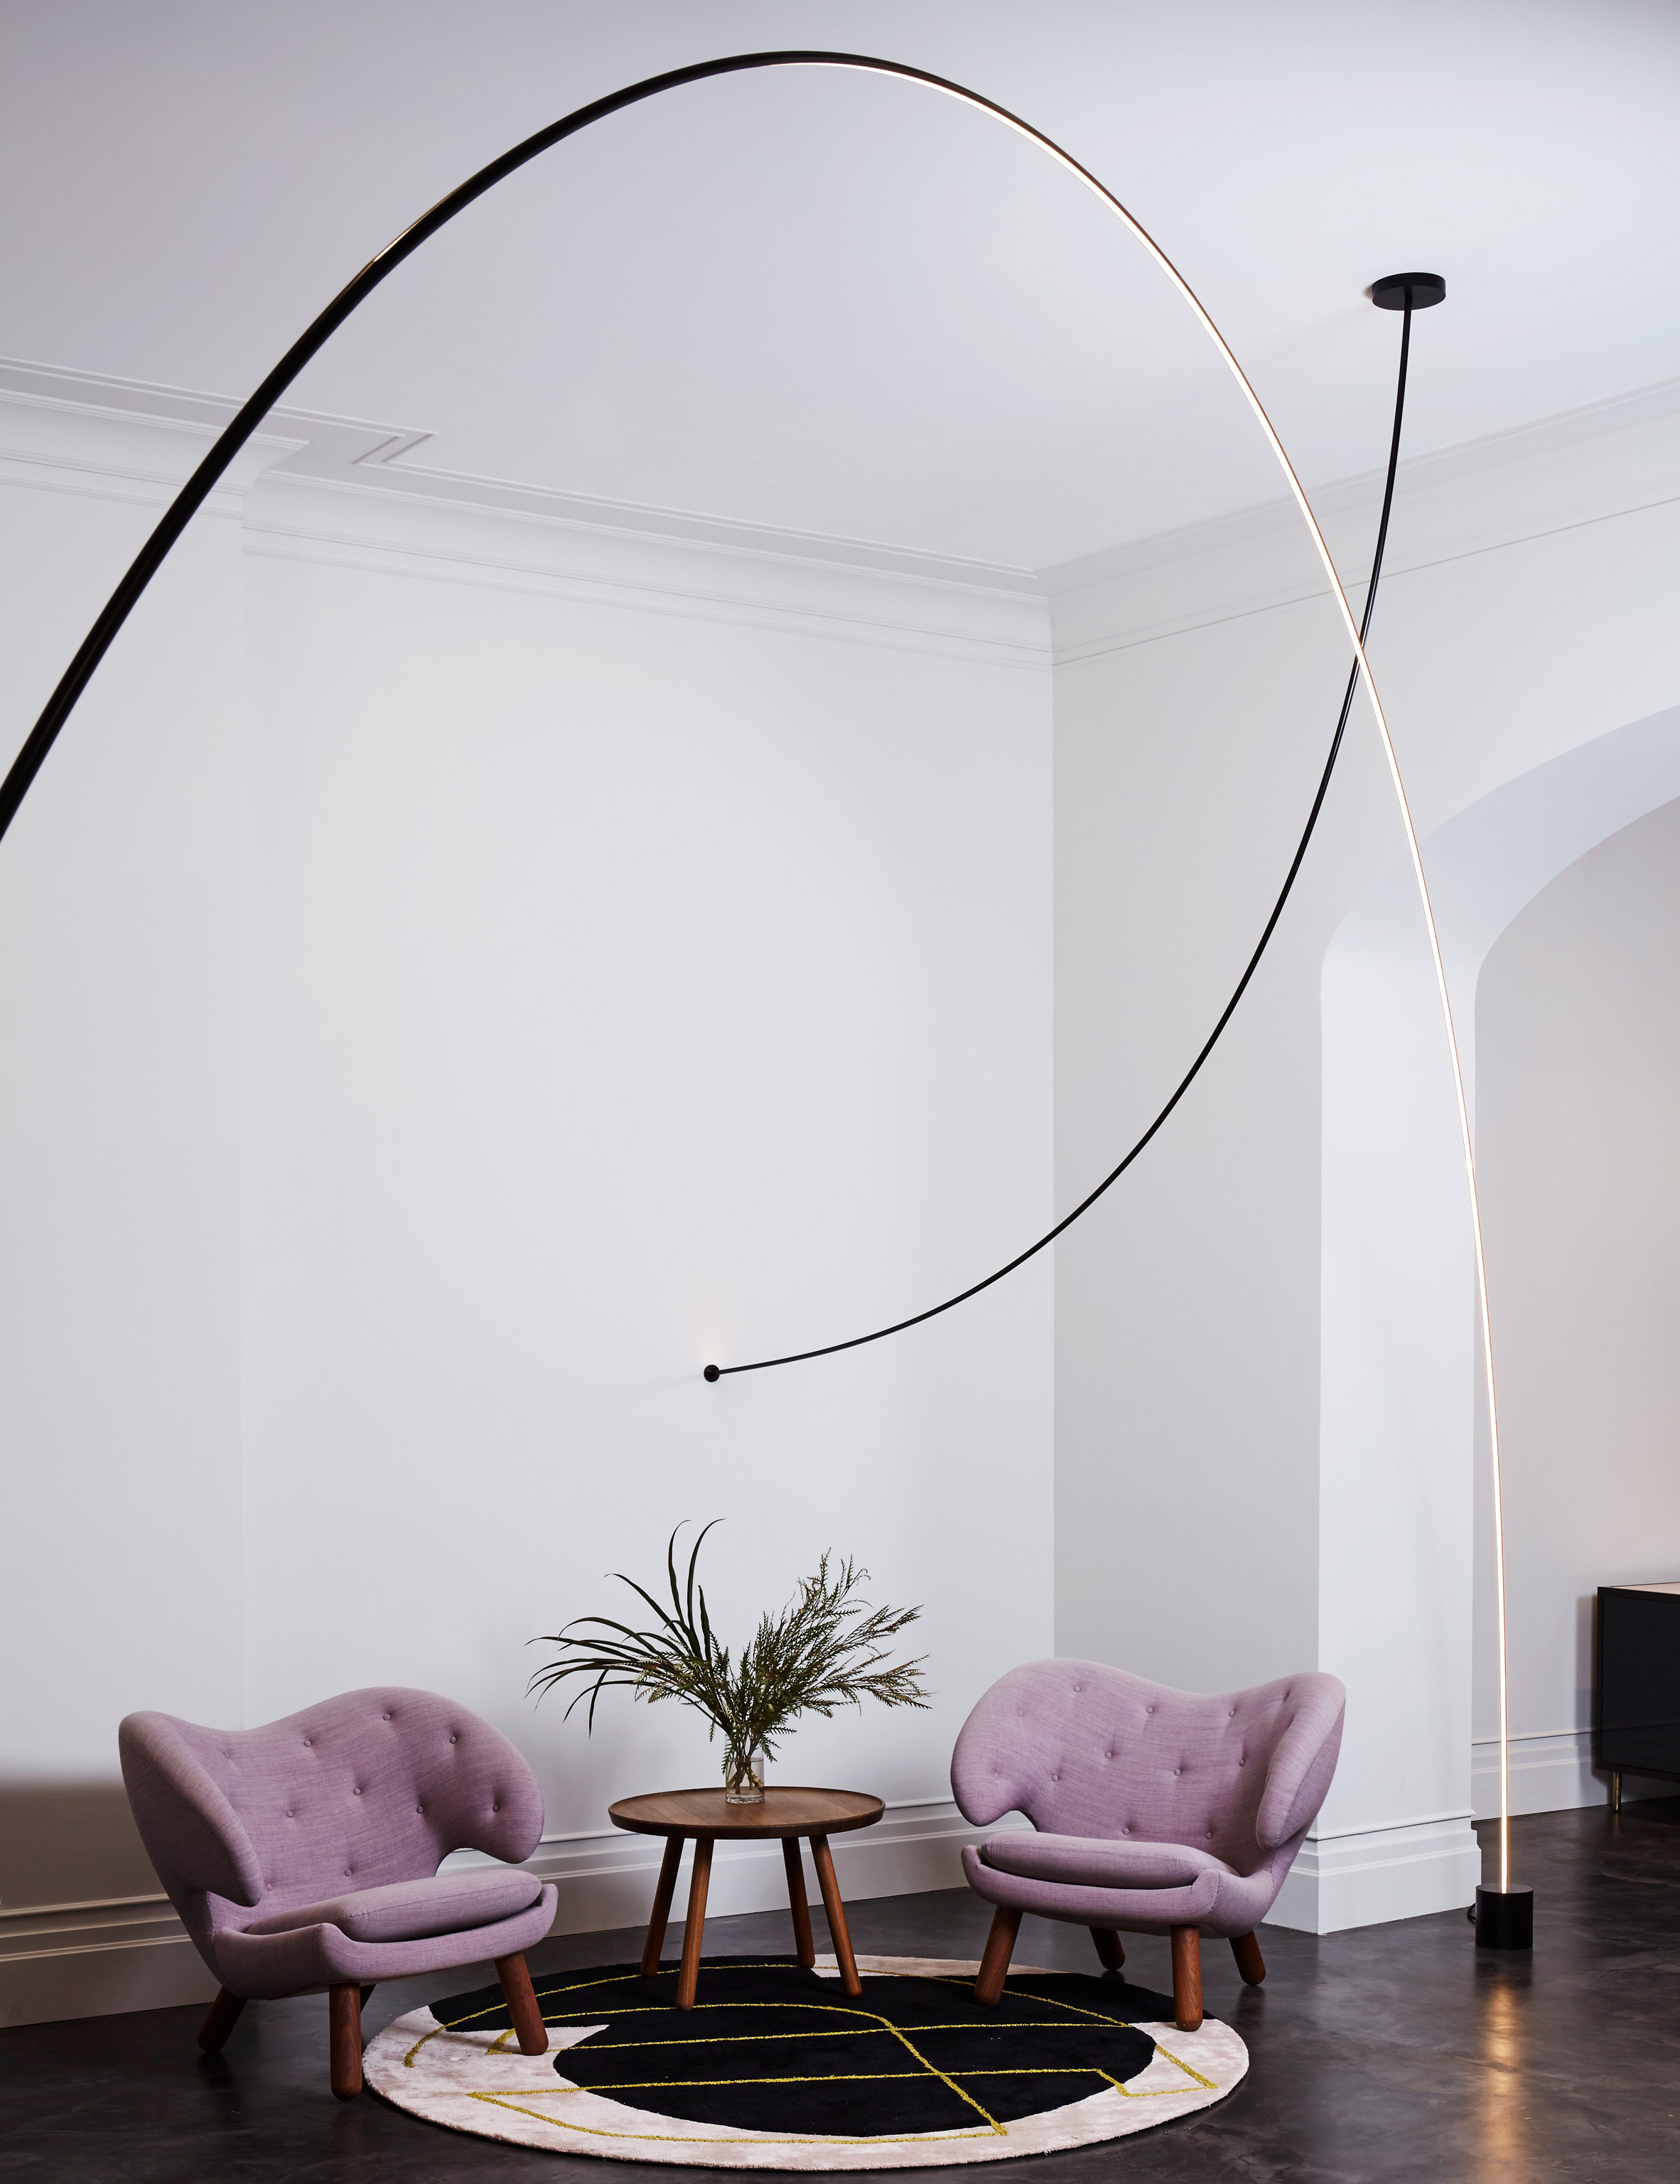 Pole by Phillippe Malouin for Roll & Hill